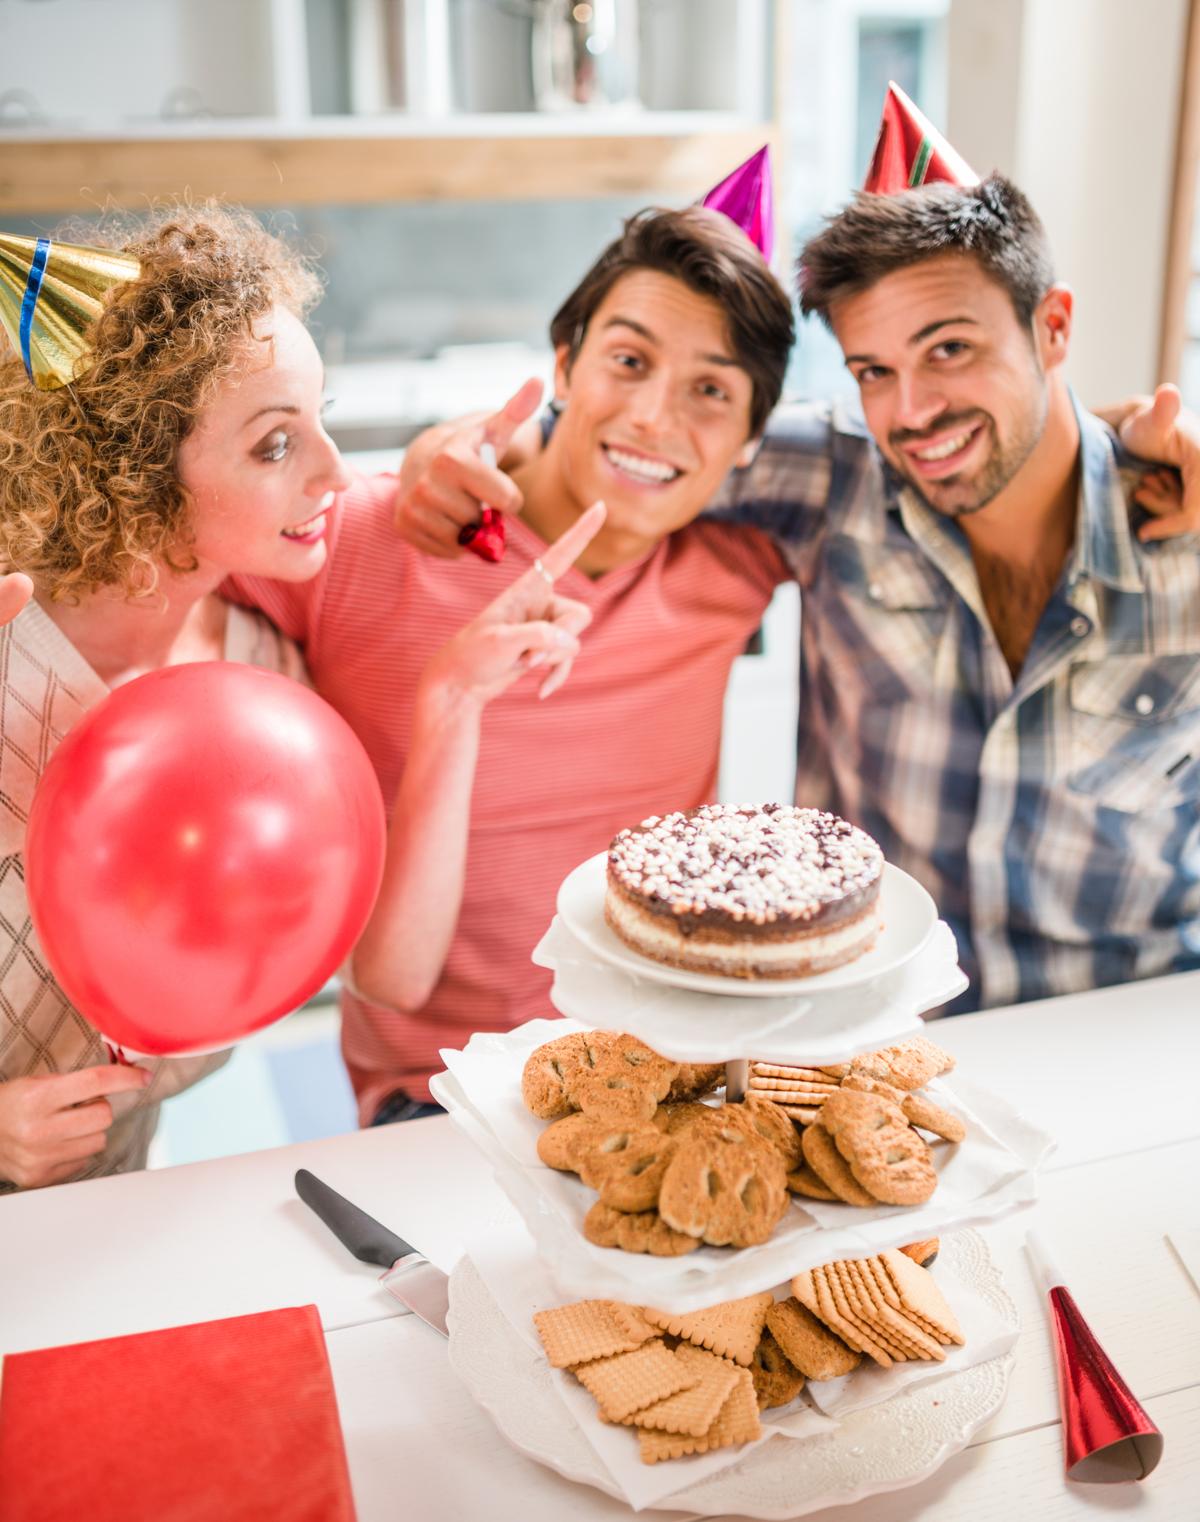 Cool Things to Do on Your 18th Birthday and Step Into 